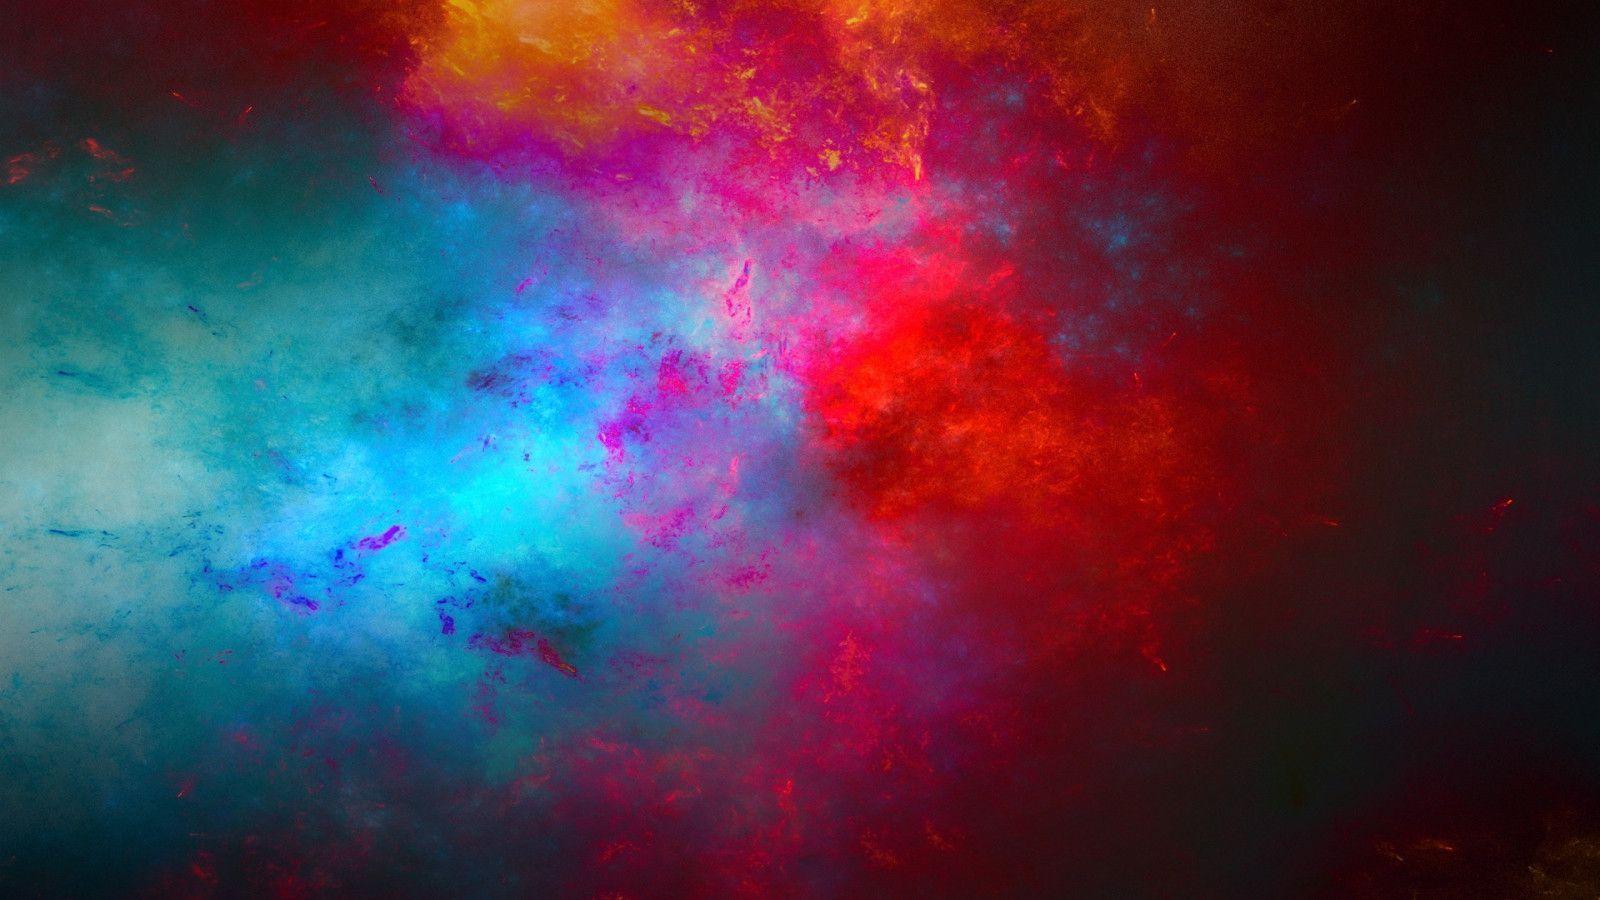 Free Download 1600x900 Resolution of high quality red blue mixed